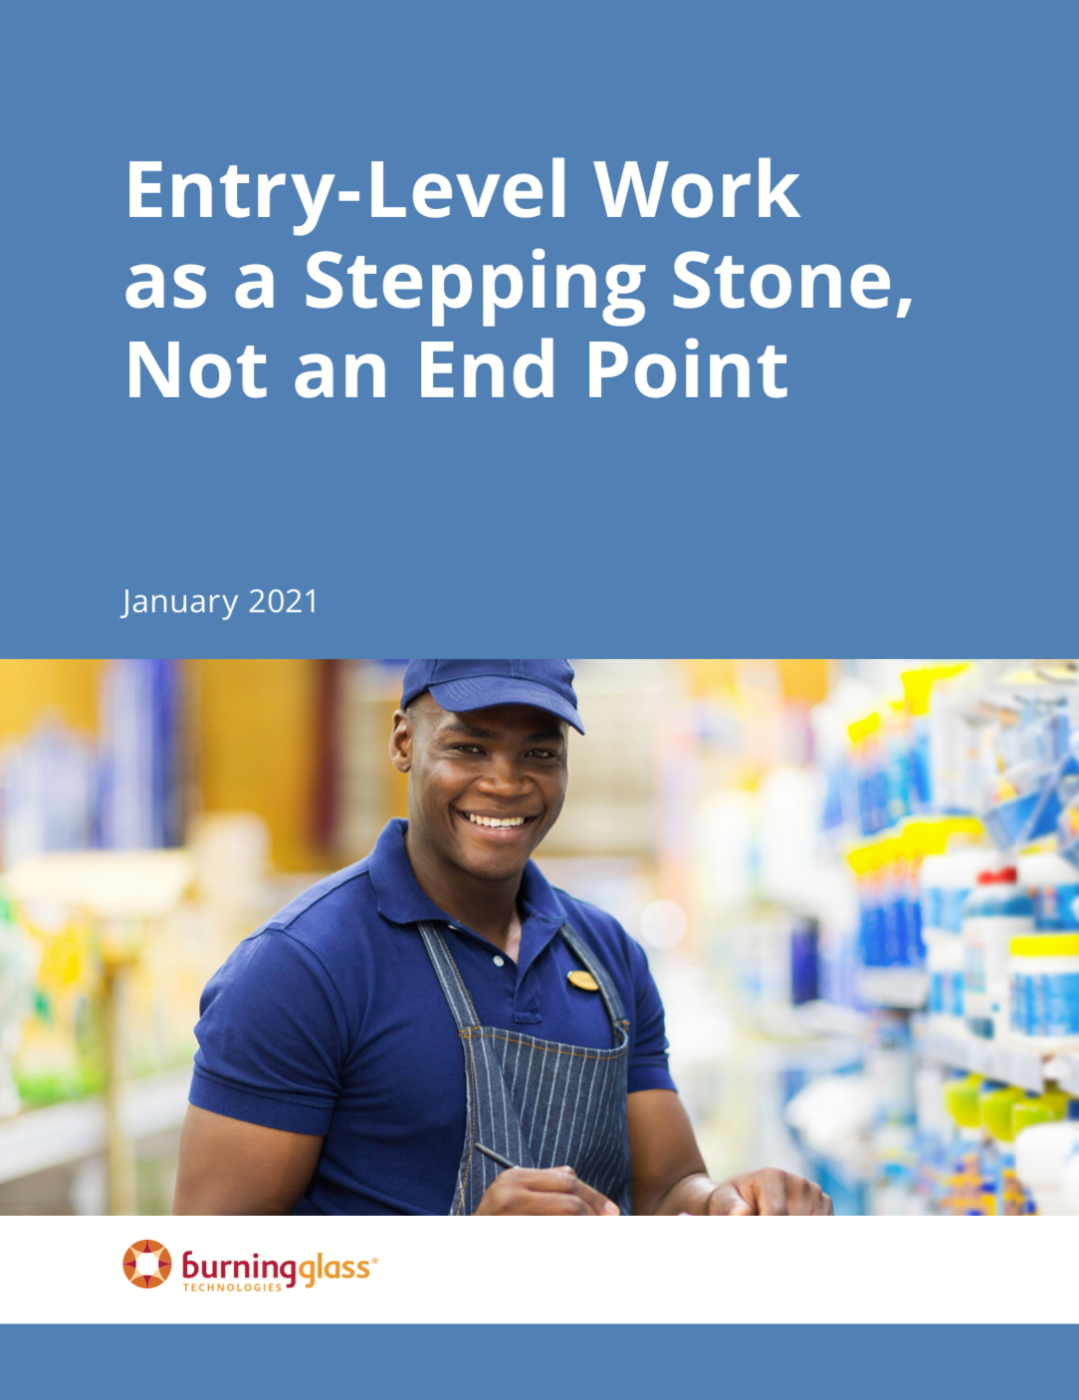 Entry-Level Work as a Stepping Stone, Not an End Point,